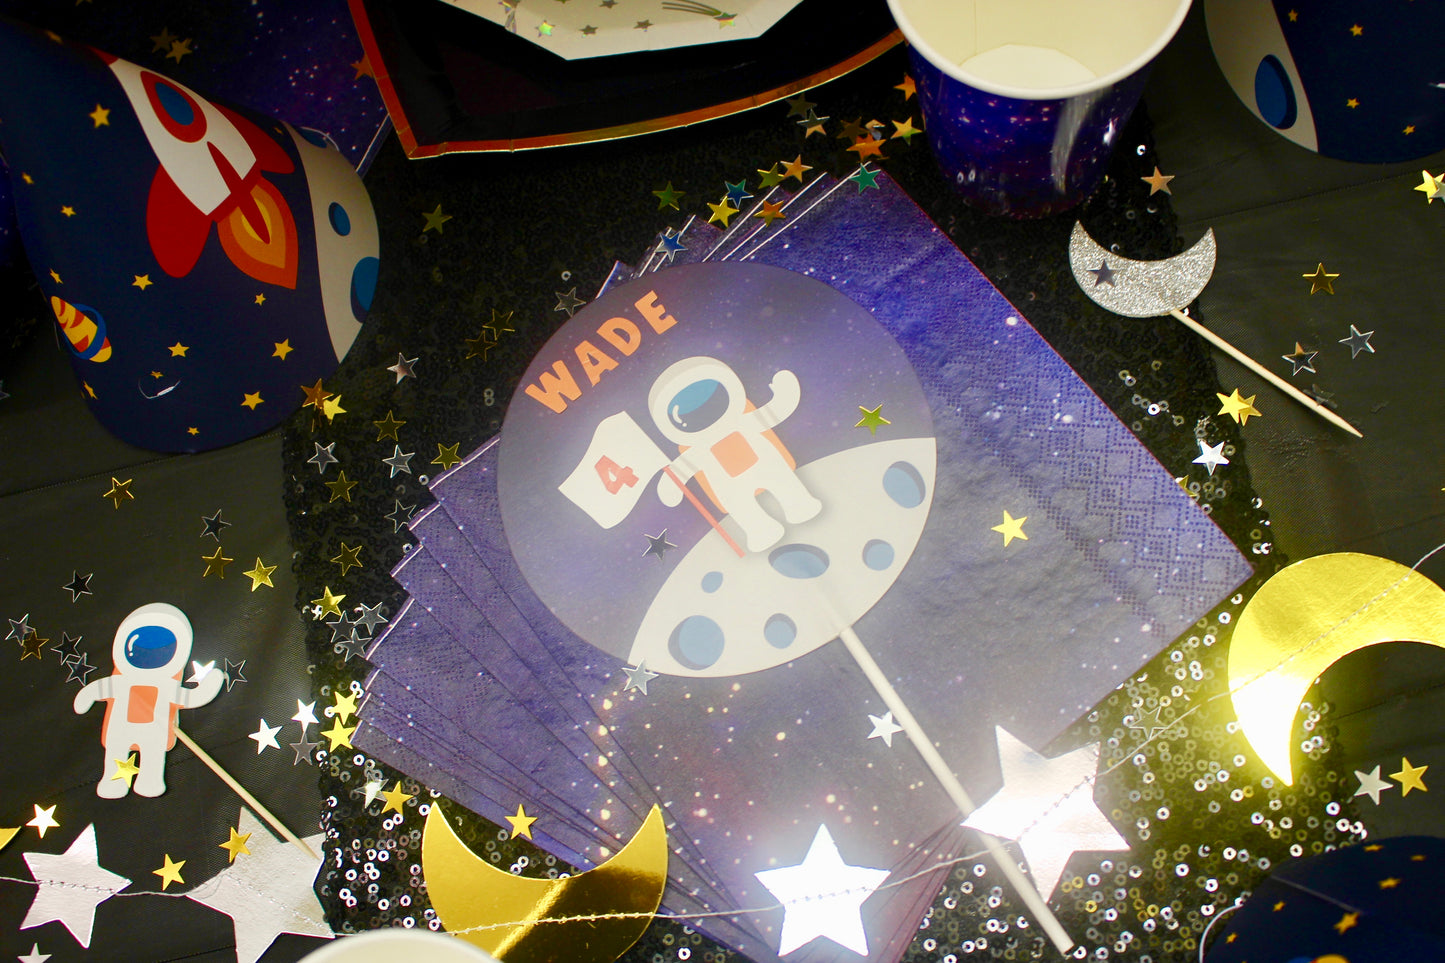 Outer Space Party Box